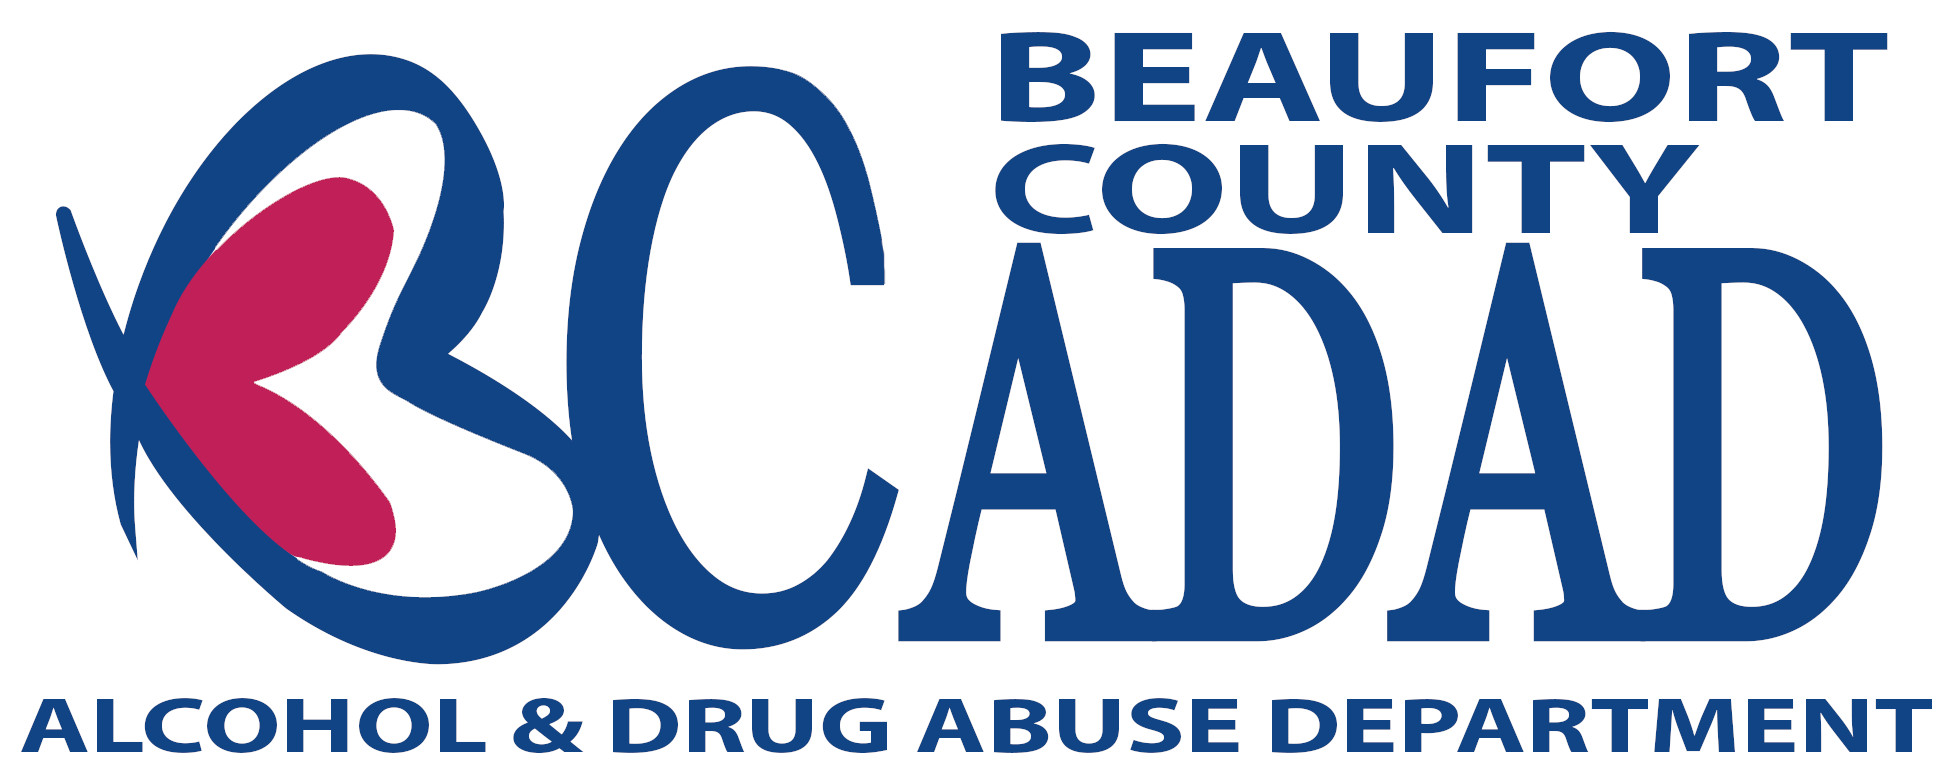 Beaufort County Alcohol and  Drug Abuse Department Announces September is Fetal Alcohol  Spectrum Disorder Month